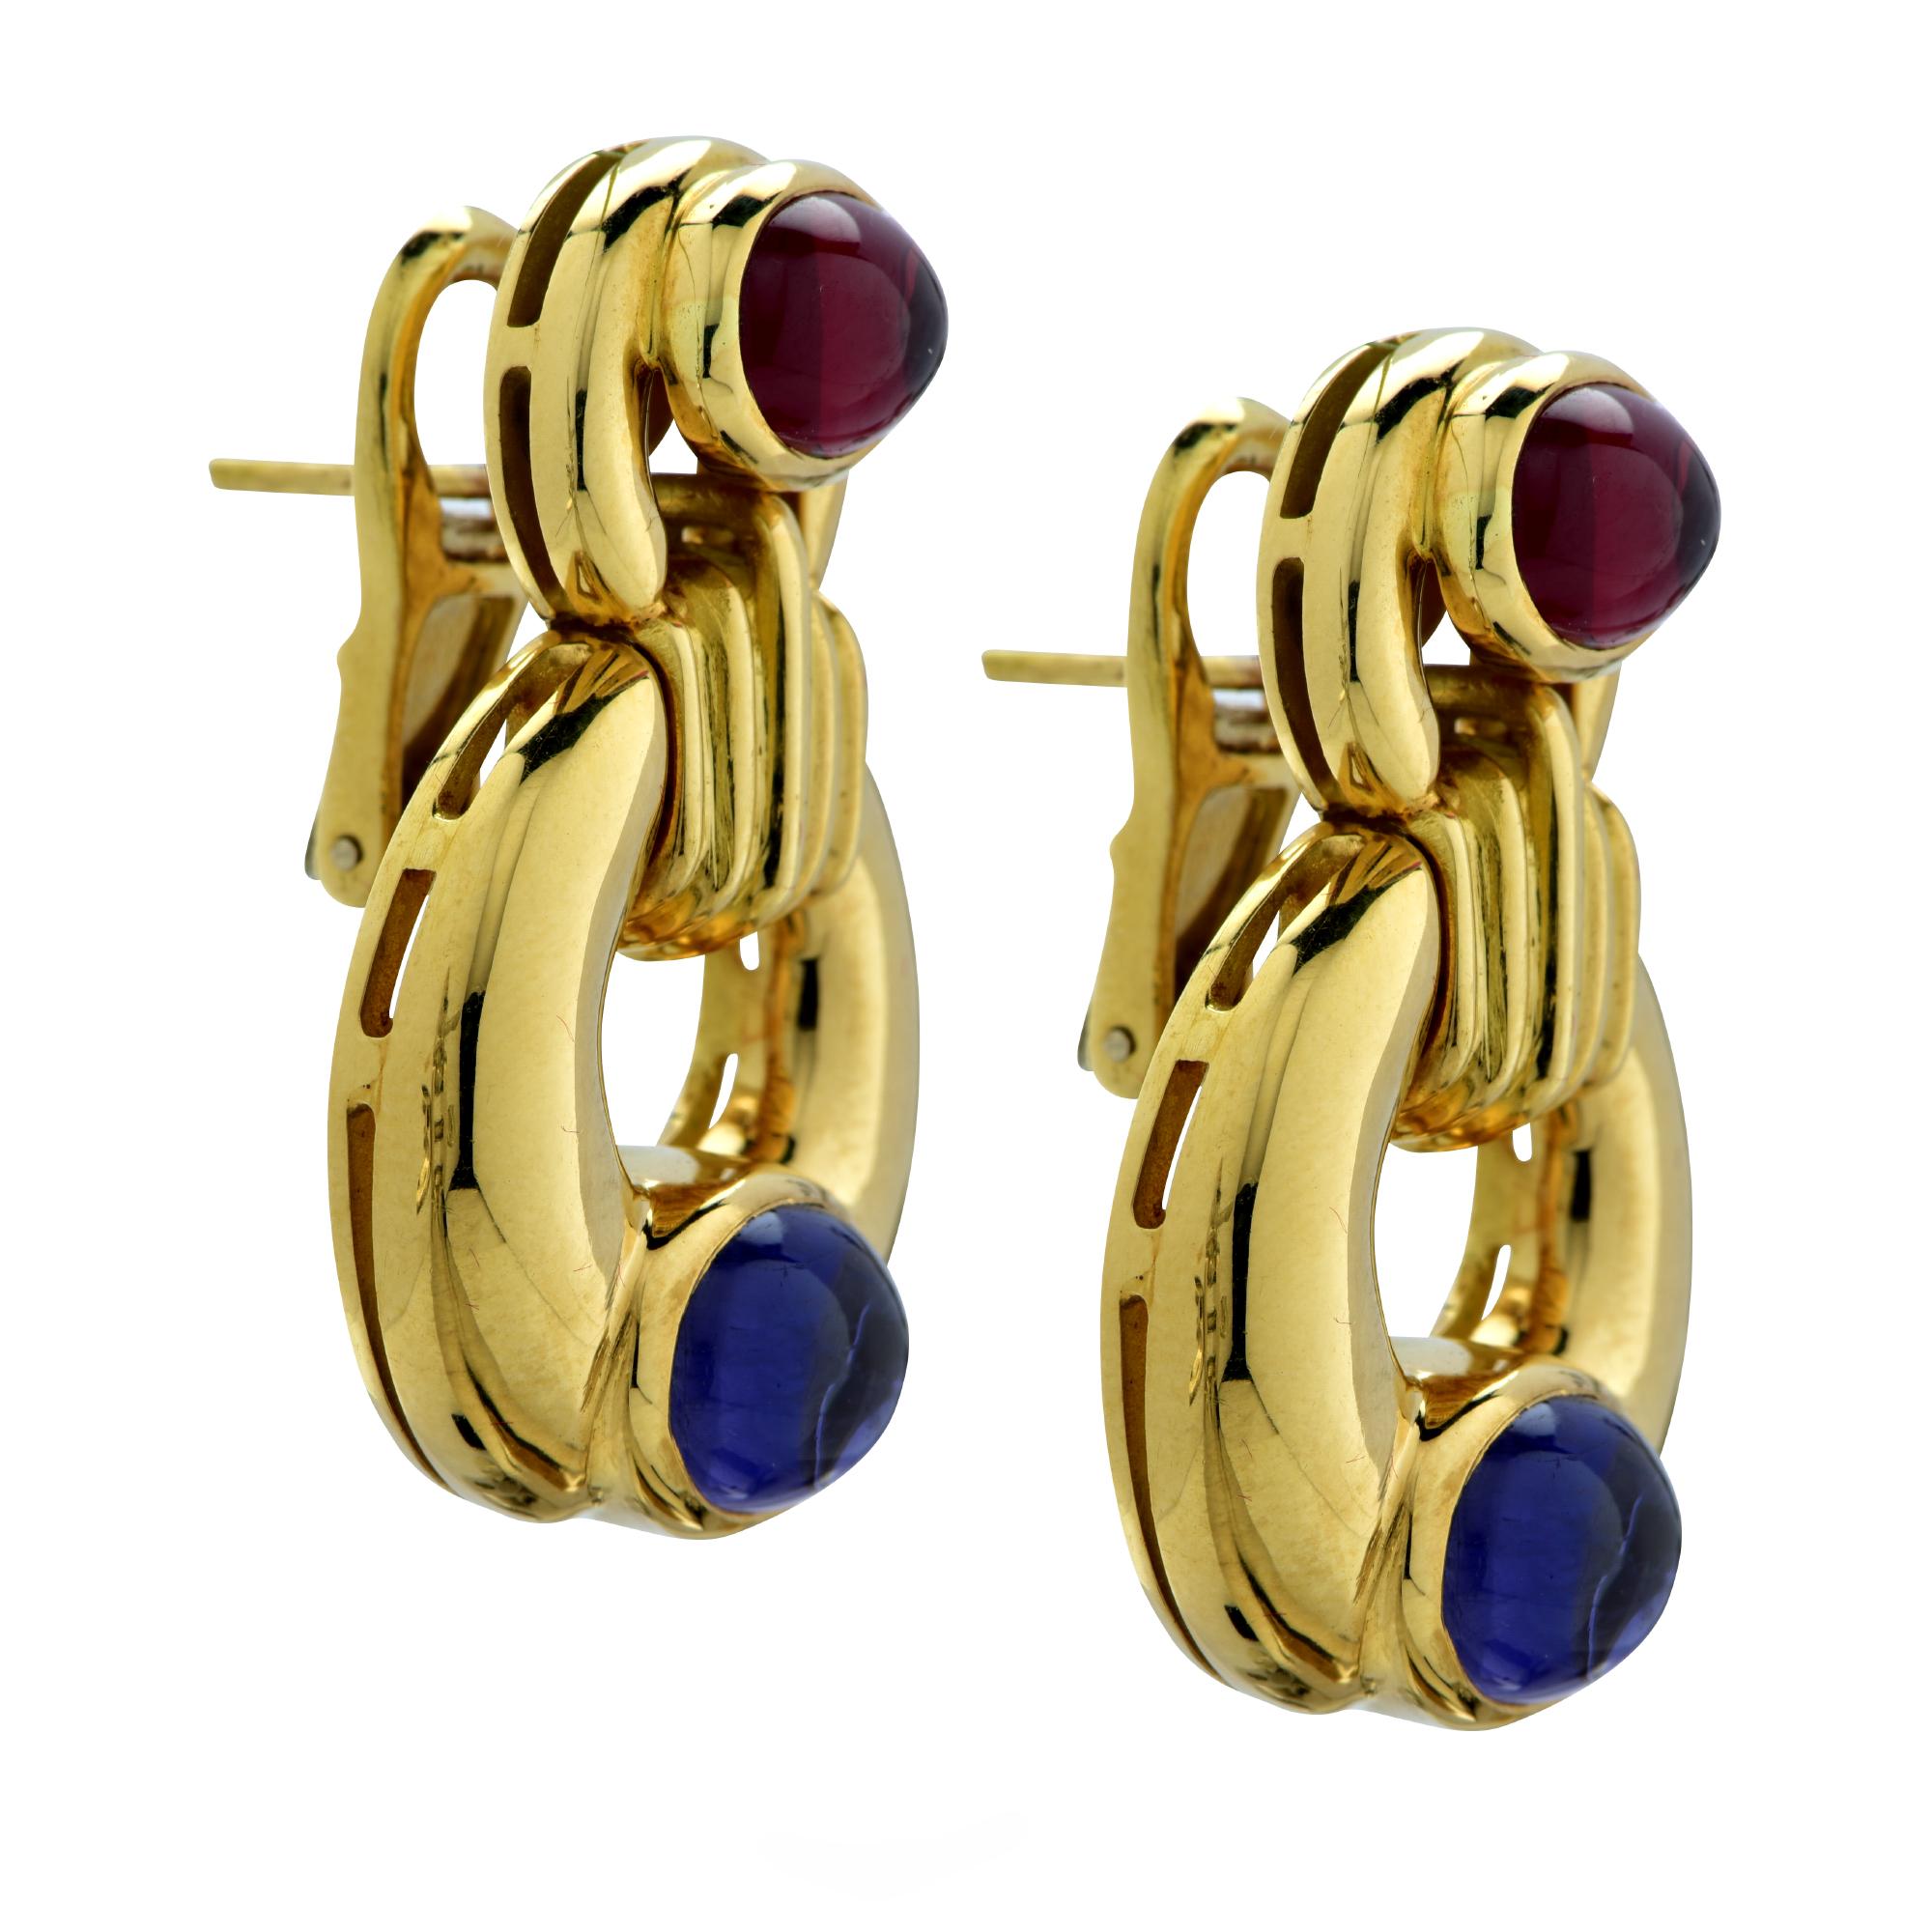 Gorgeous contemporary dangle earrings, crafted in 18 Karat yellow gold, featuring an oval cabochon garnet and an oval cabochon amethyst set in a circular design. These eye-catching earrings measure 1.35 inches in length and .92 inches at its widest